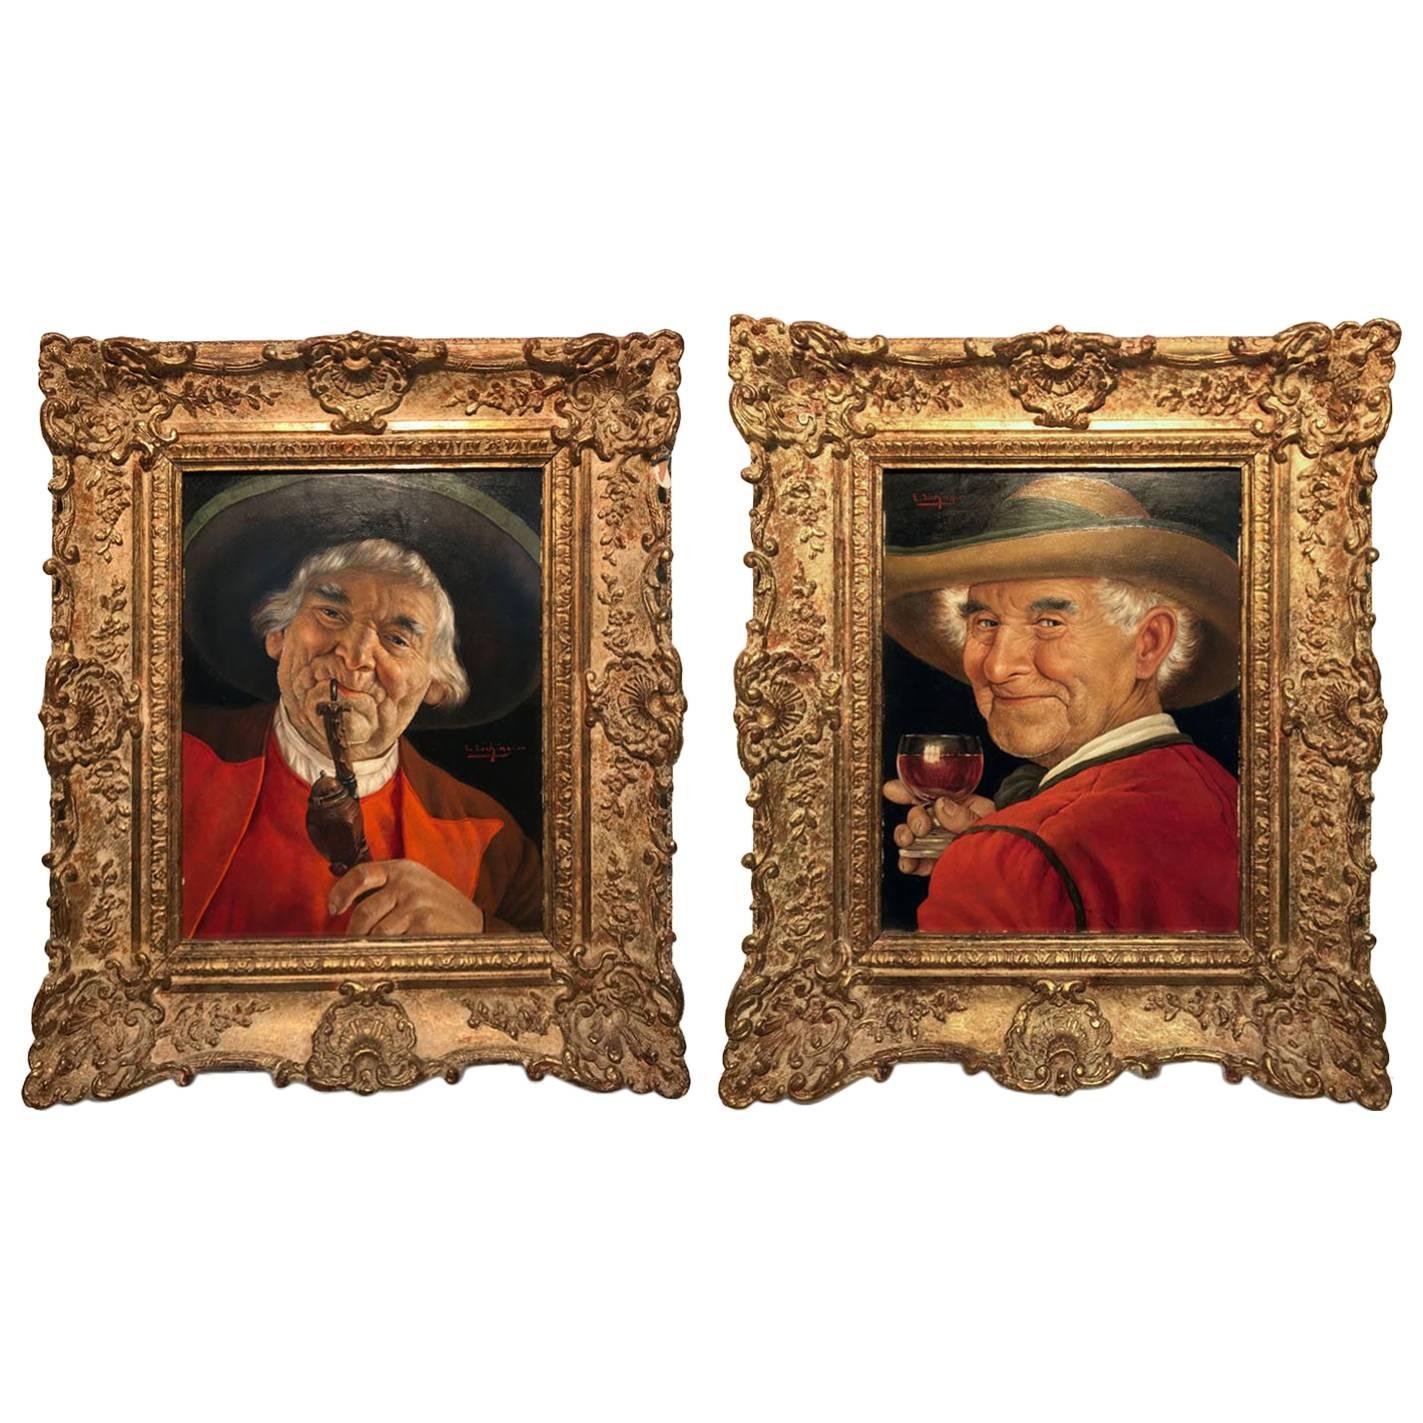 Erwin Eichinger Pair of Portraits of Tyrolean Countrymen